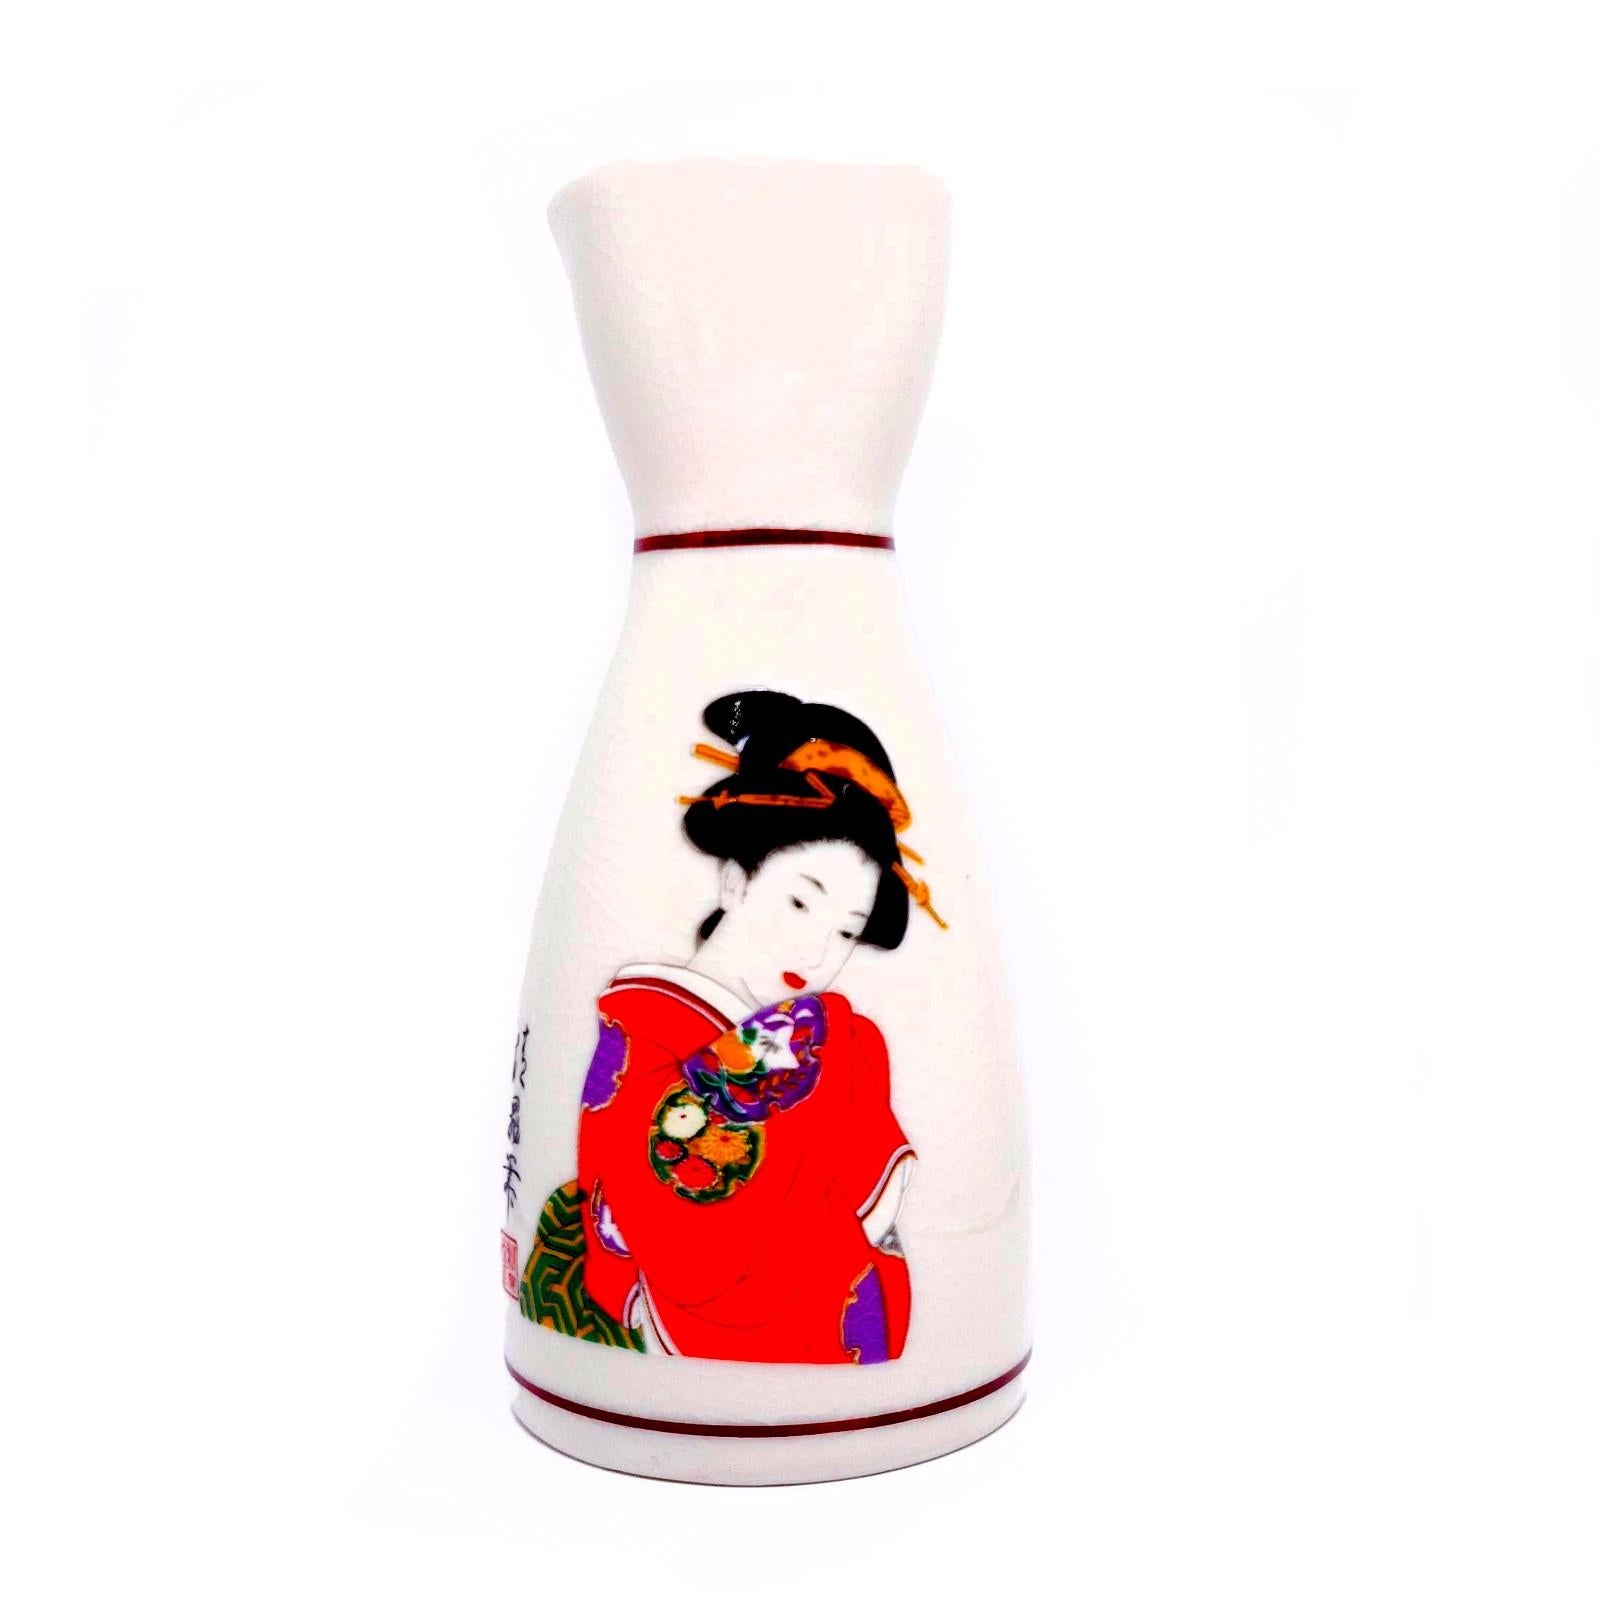 Vintage Hand Painted Ceramics Sake Set Geisha New in Box

Details:
Vintage Unused Sake Set
Made in Japan
New in Opened Box

Includes 2 Decanters and 5 Cups 